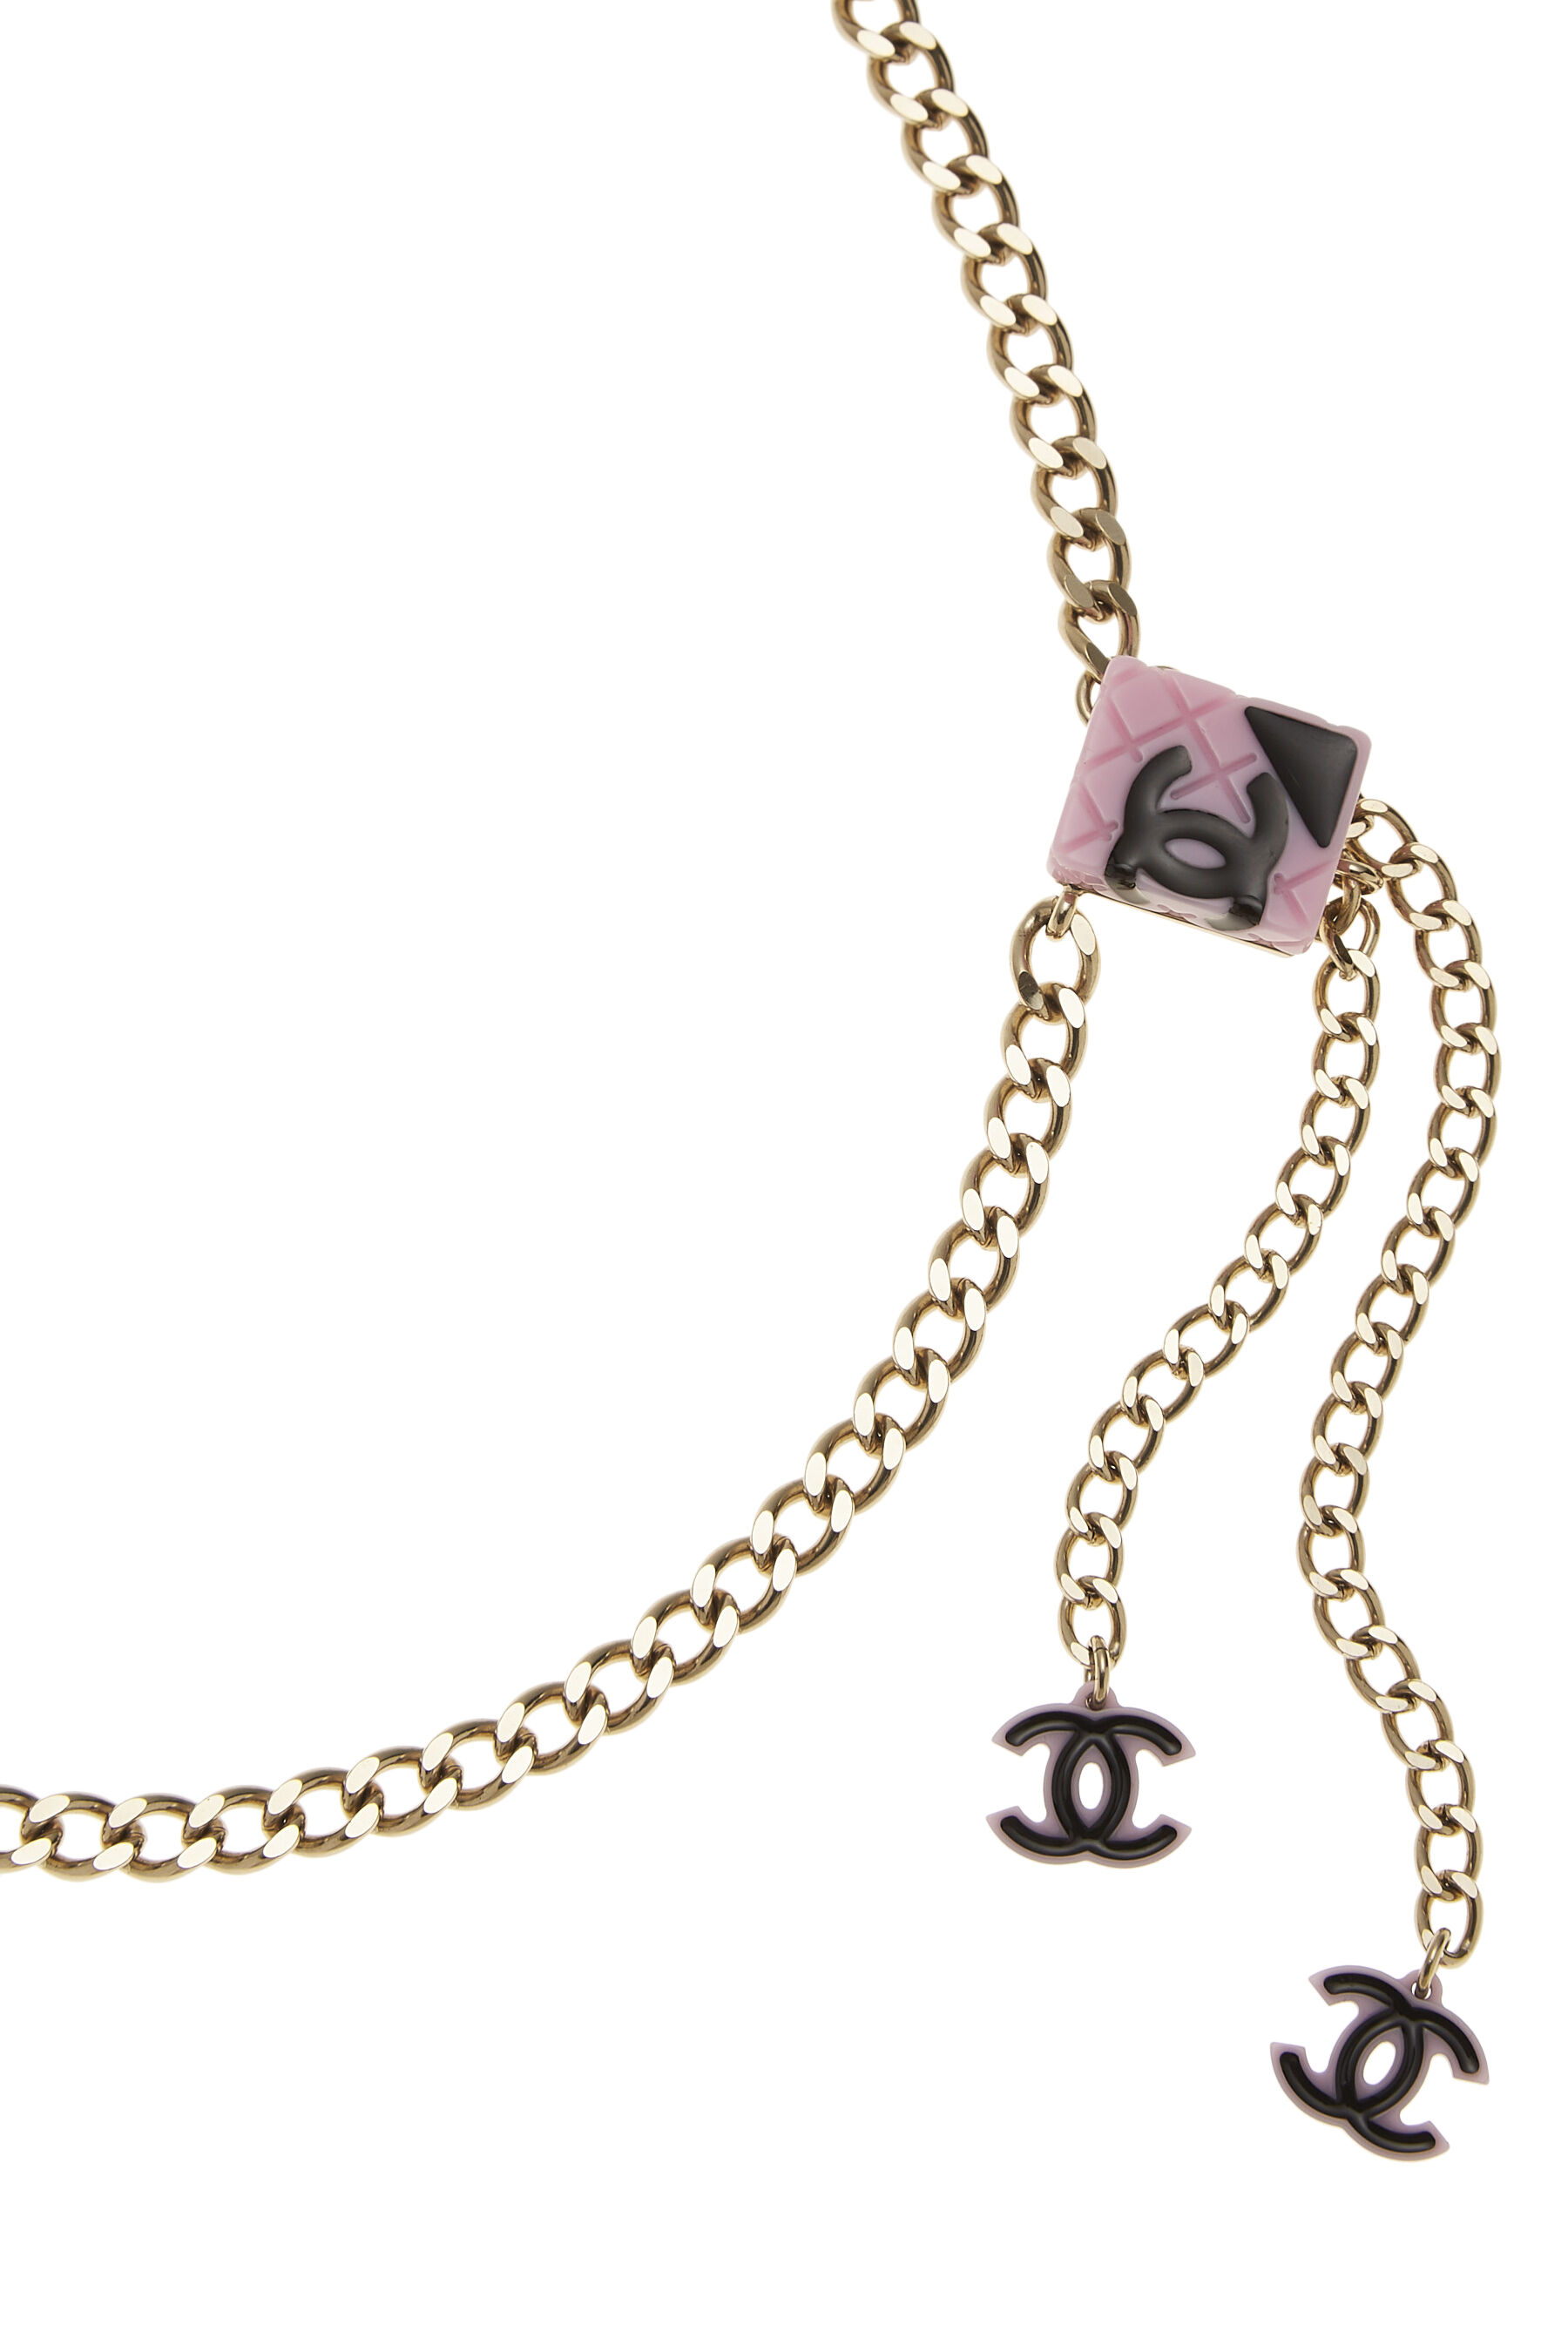 Chanel Gold Metal And Black Enamel CC Chain Belt, 2005 Available